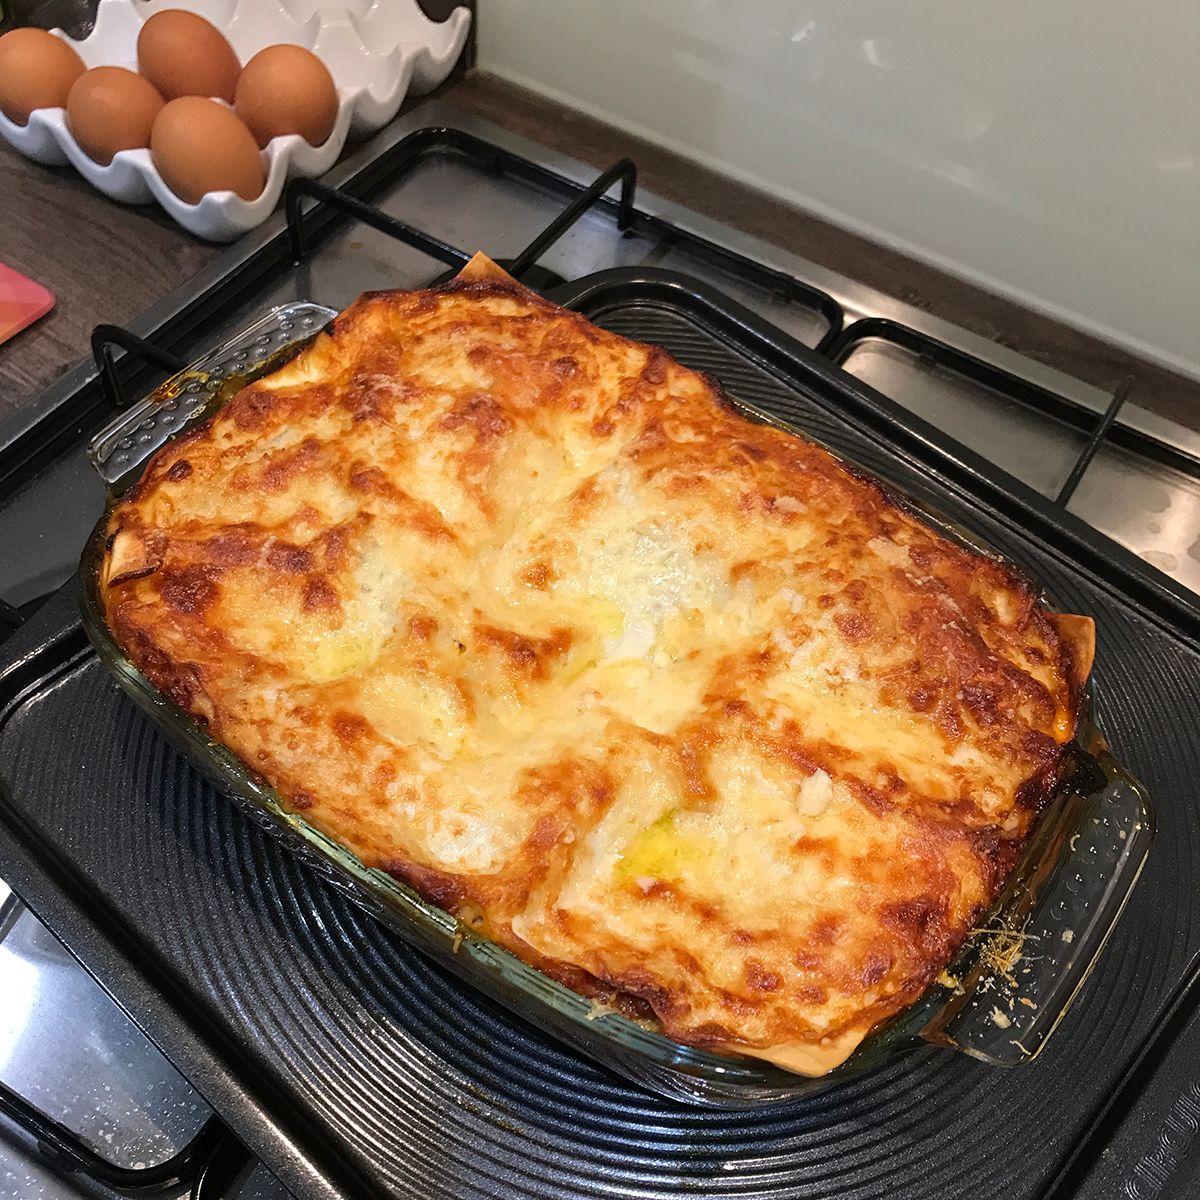 A just-cooked lasagne in a glass dish on a baking tray on top of a cooking hob